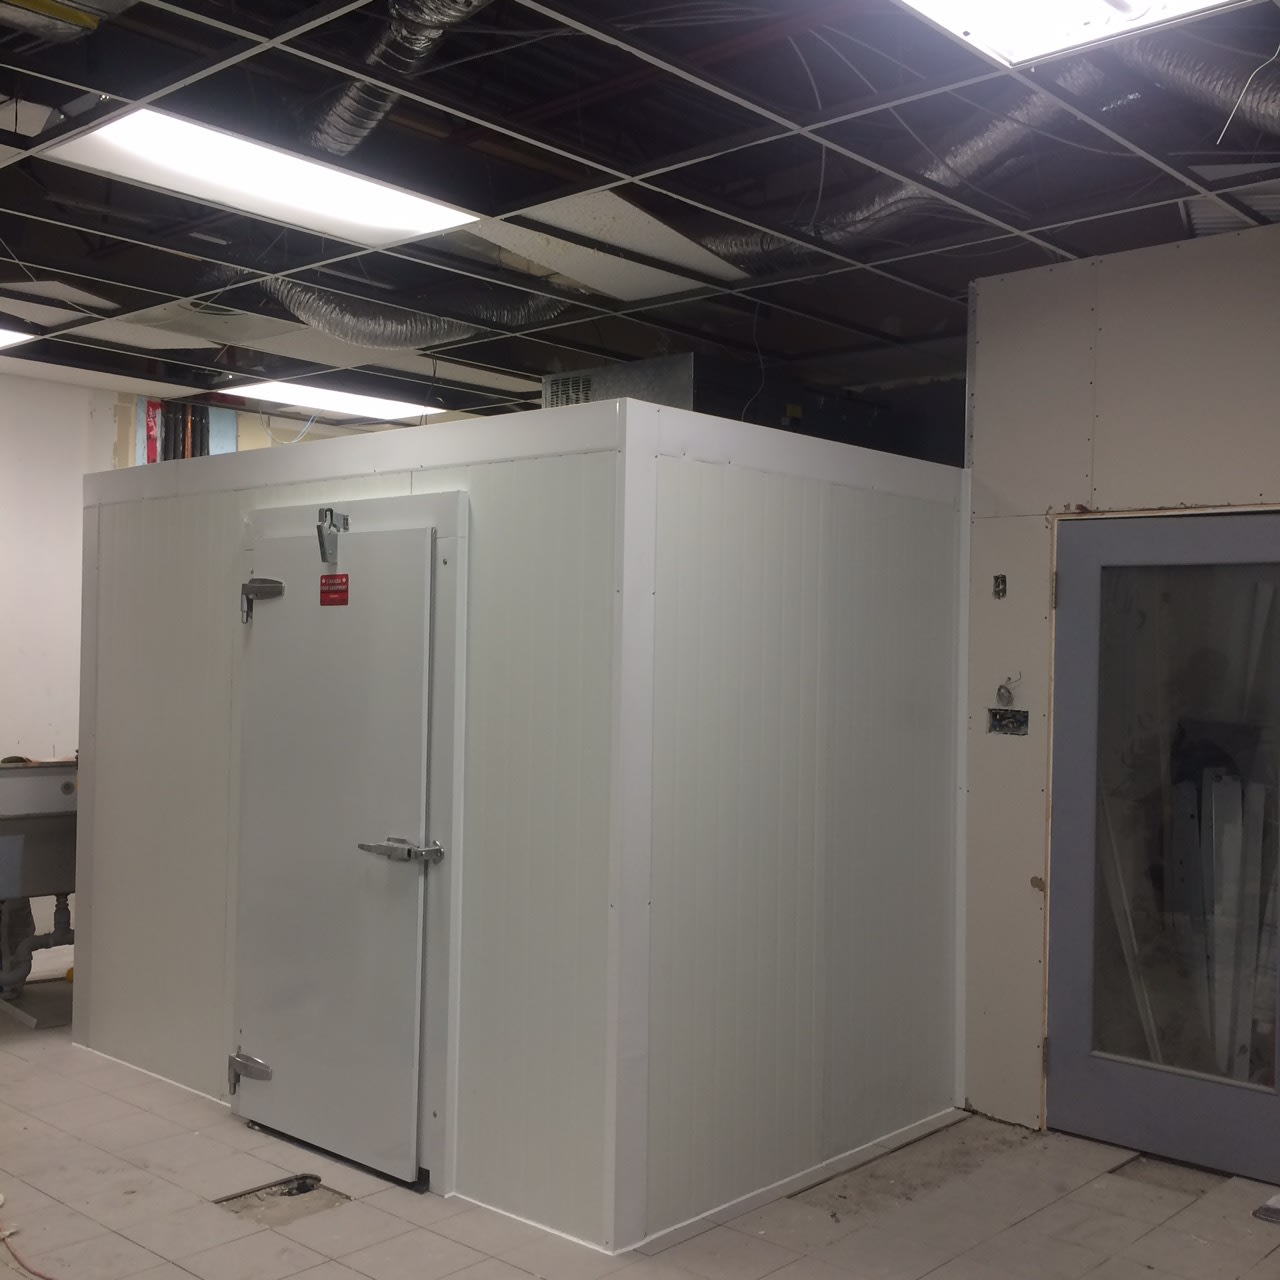 10x10x8H Walk-In Freezer - Self Contained (NEW) - F10108NSC